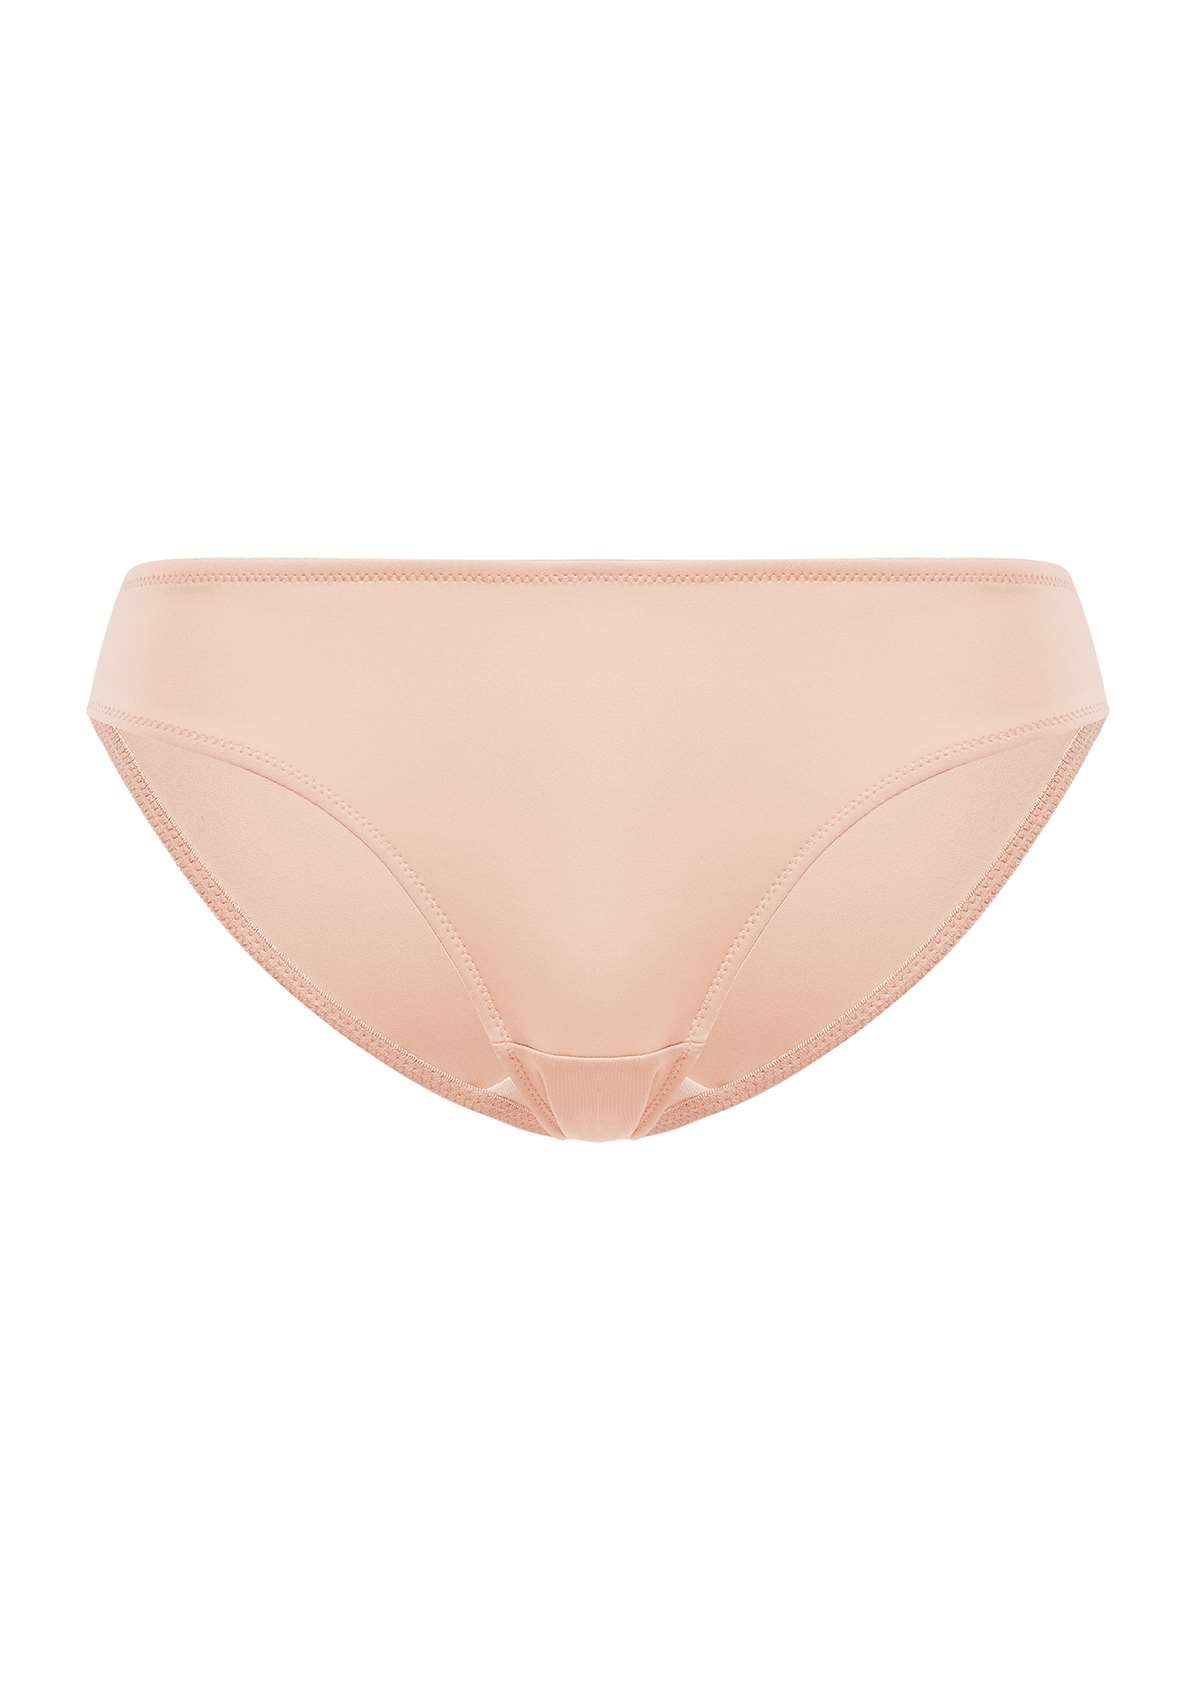 HSIA Patricia Smooth Classic Soft Stretch Panty - Everyday Comfort - XL / Light Pink